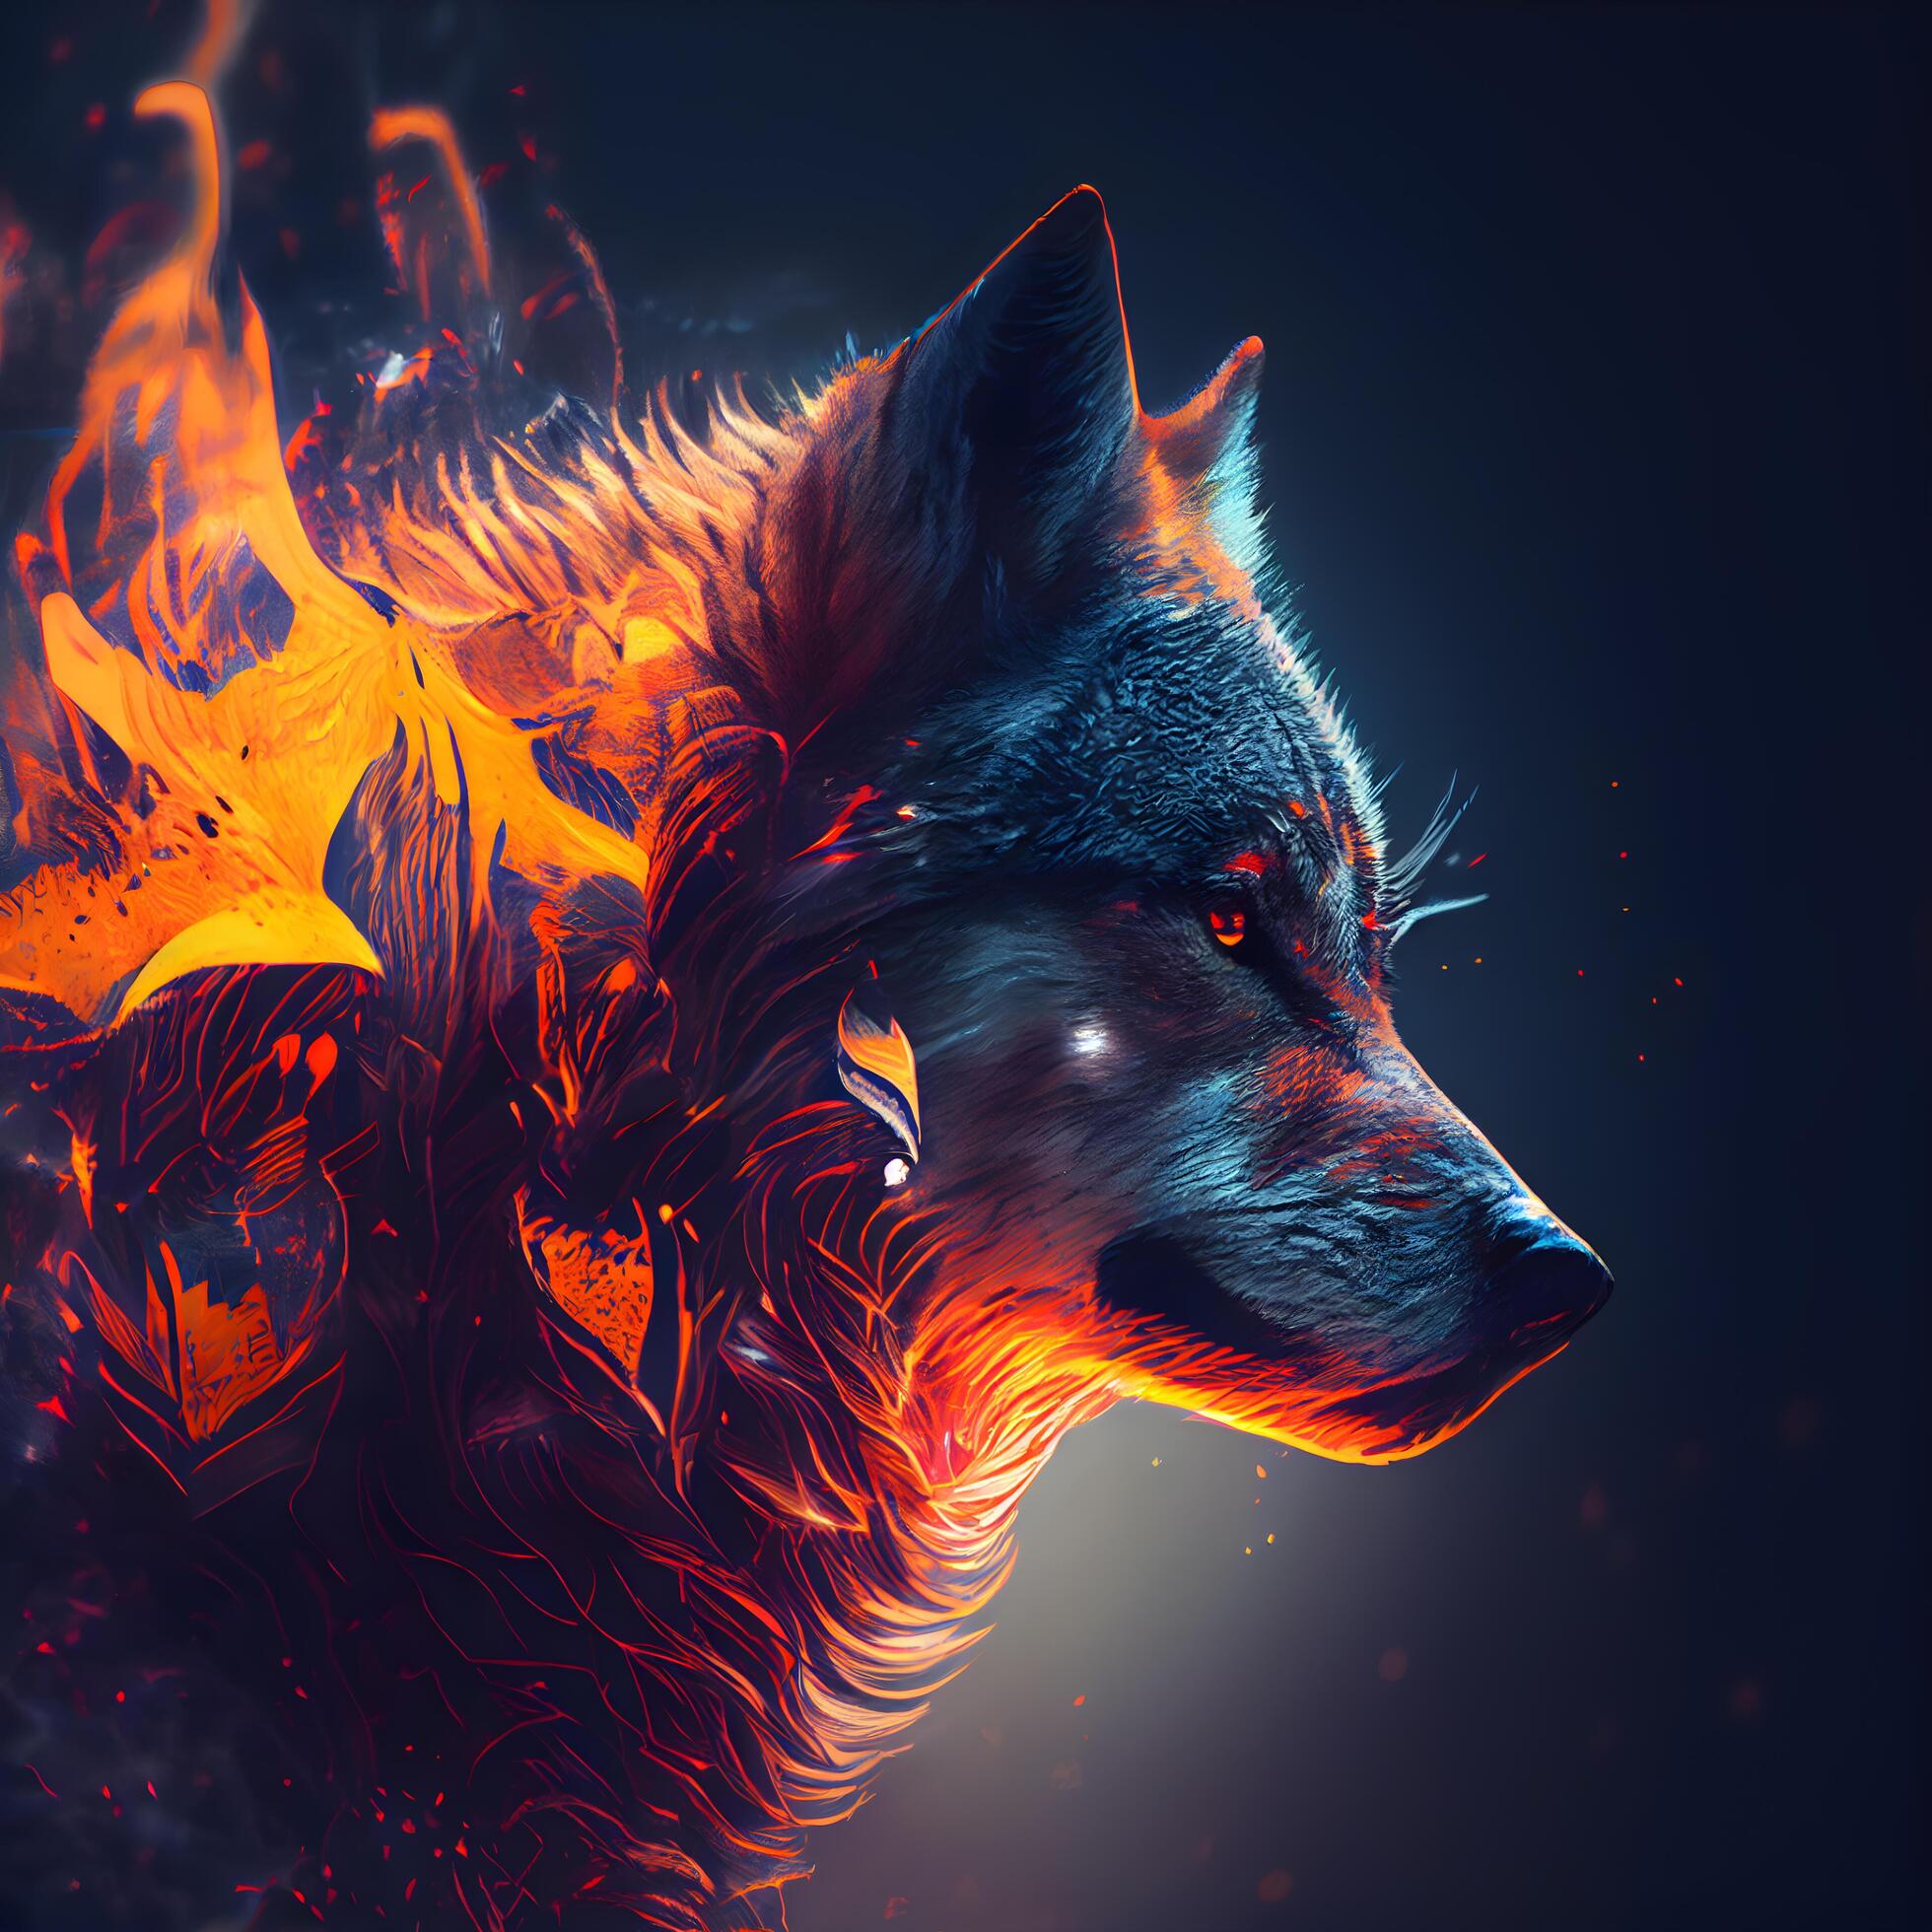 Wolf In The Fire. Fire Background. Fire Effect. Illustration Free Image and  Photograph 198352788.